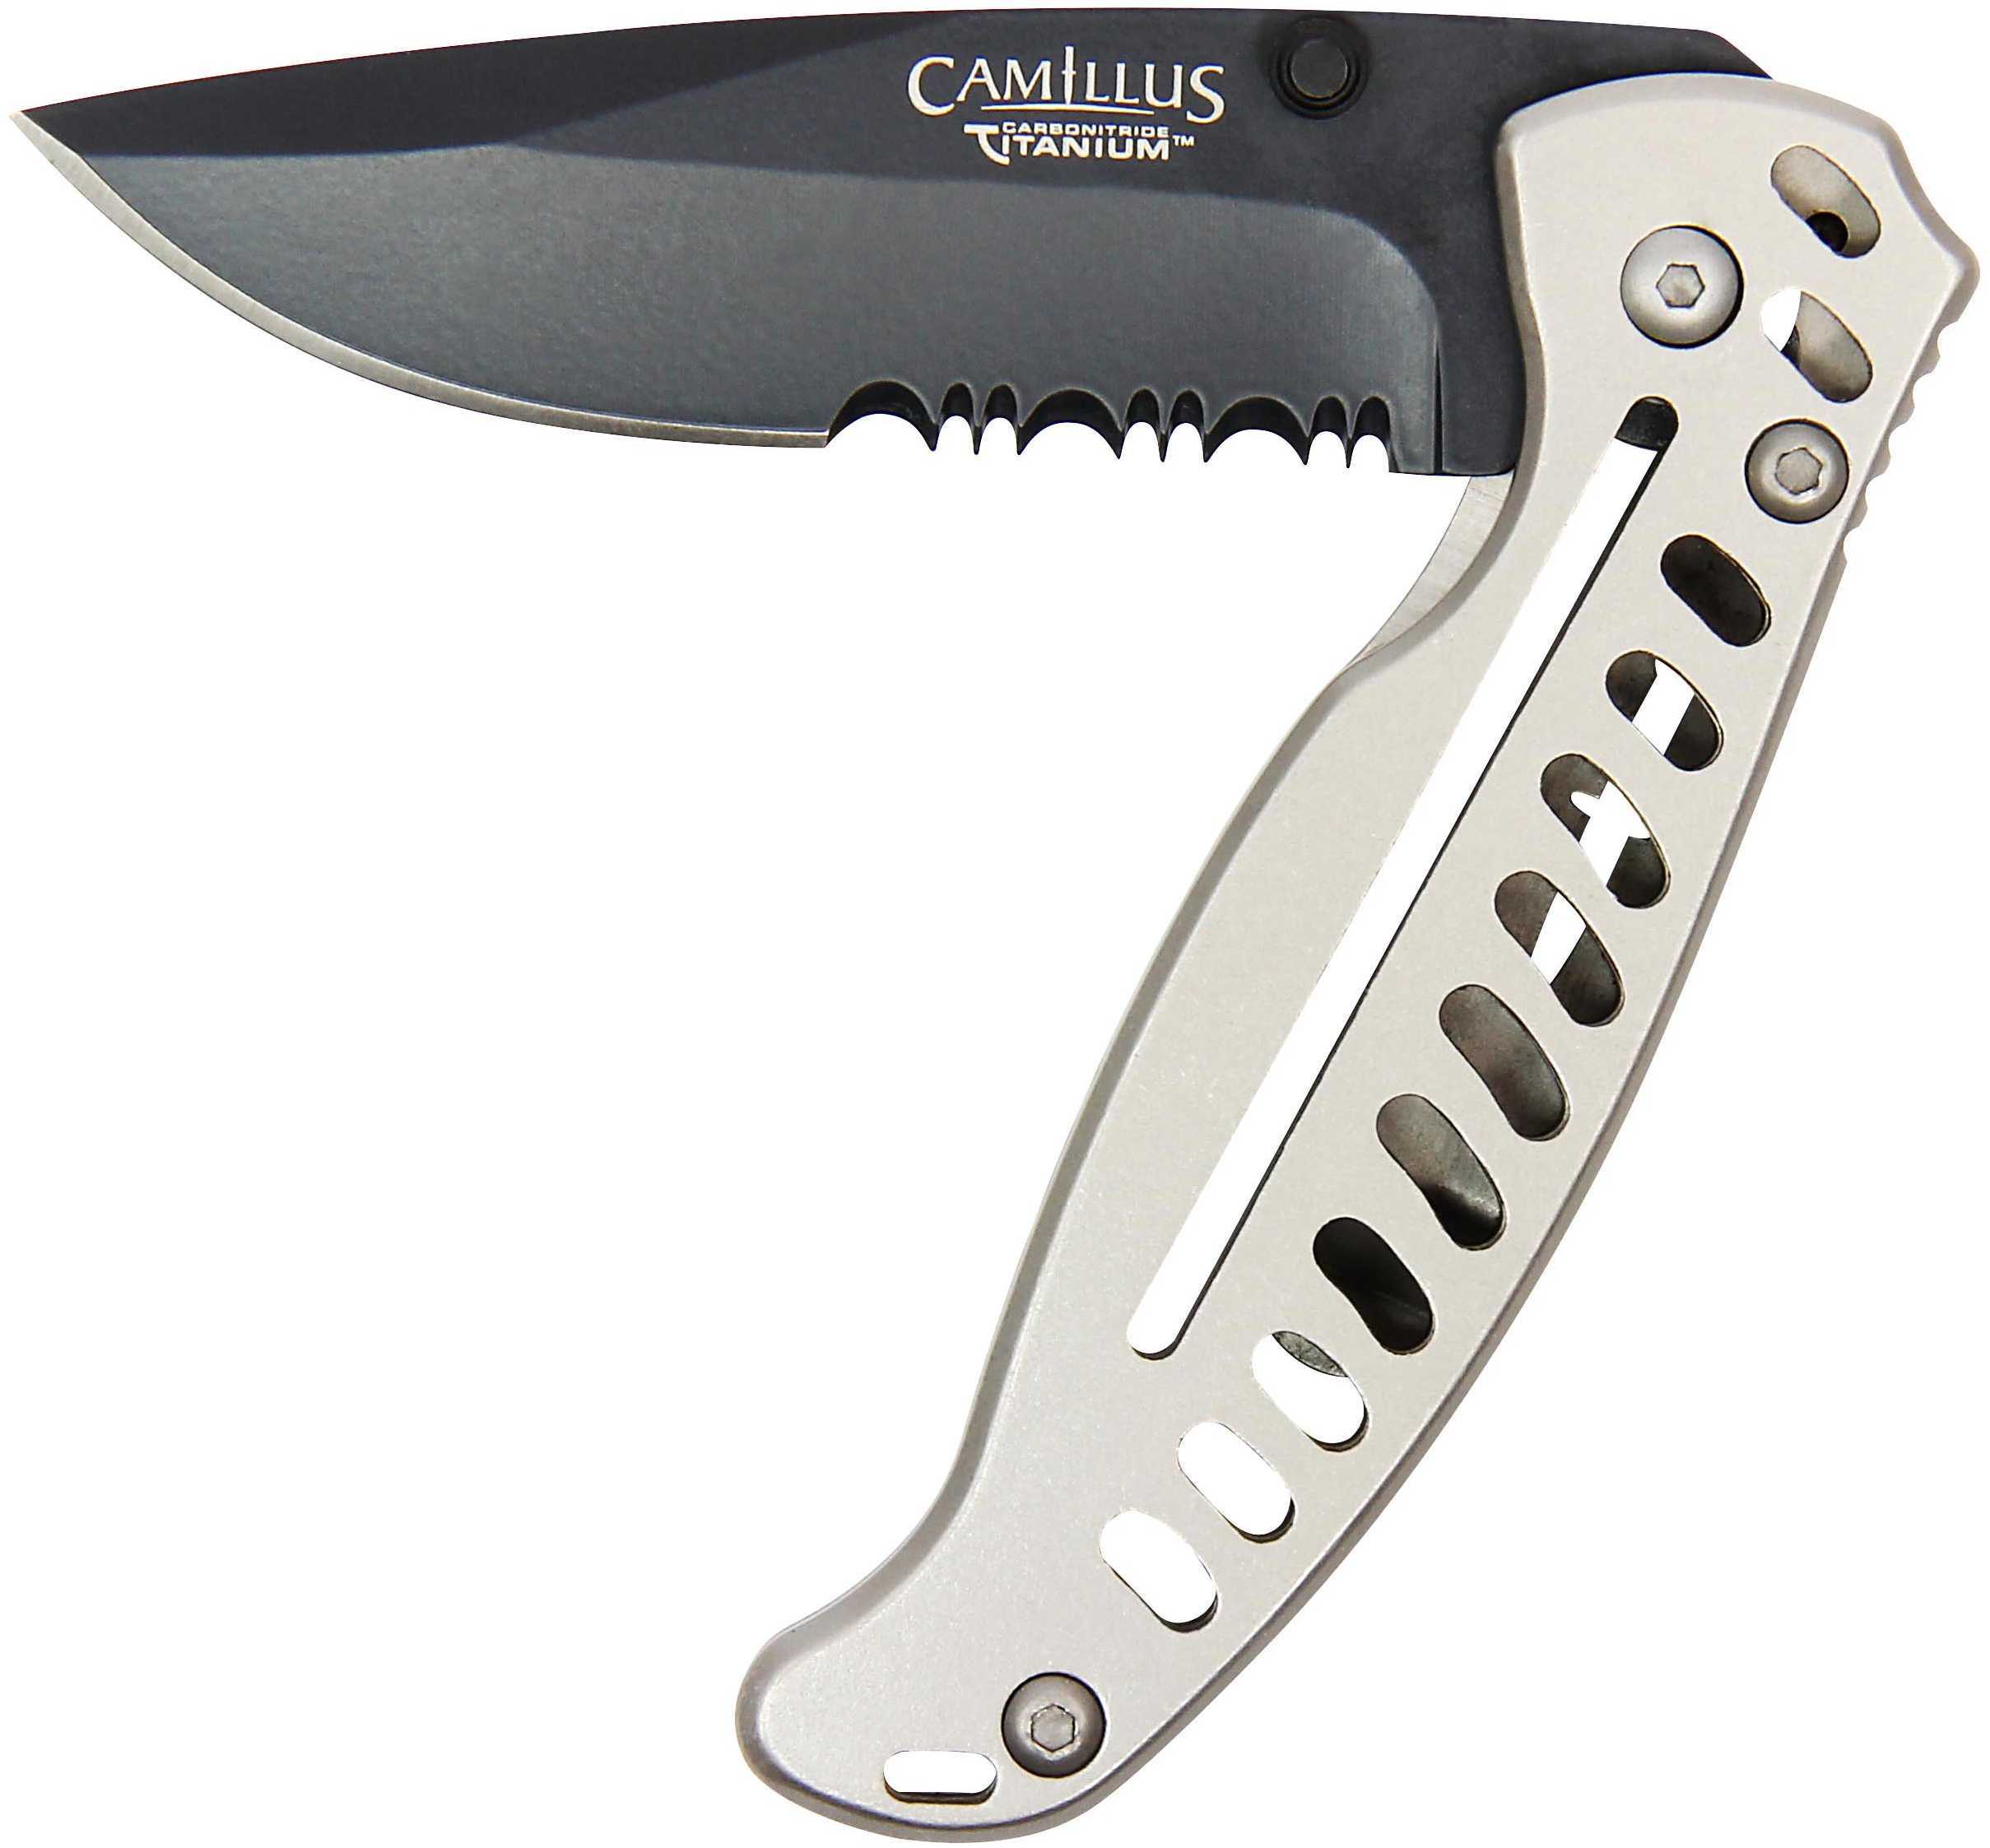 Camillius Edc3 Folding Knife Combo Edge Silver Stainless Steel Handle Matte Finish Black 3" Blade Length 6.75" Overall L